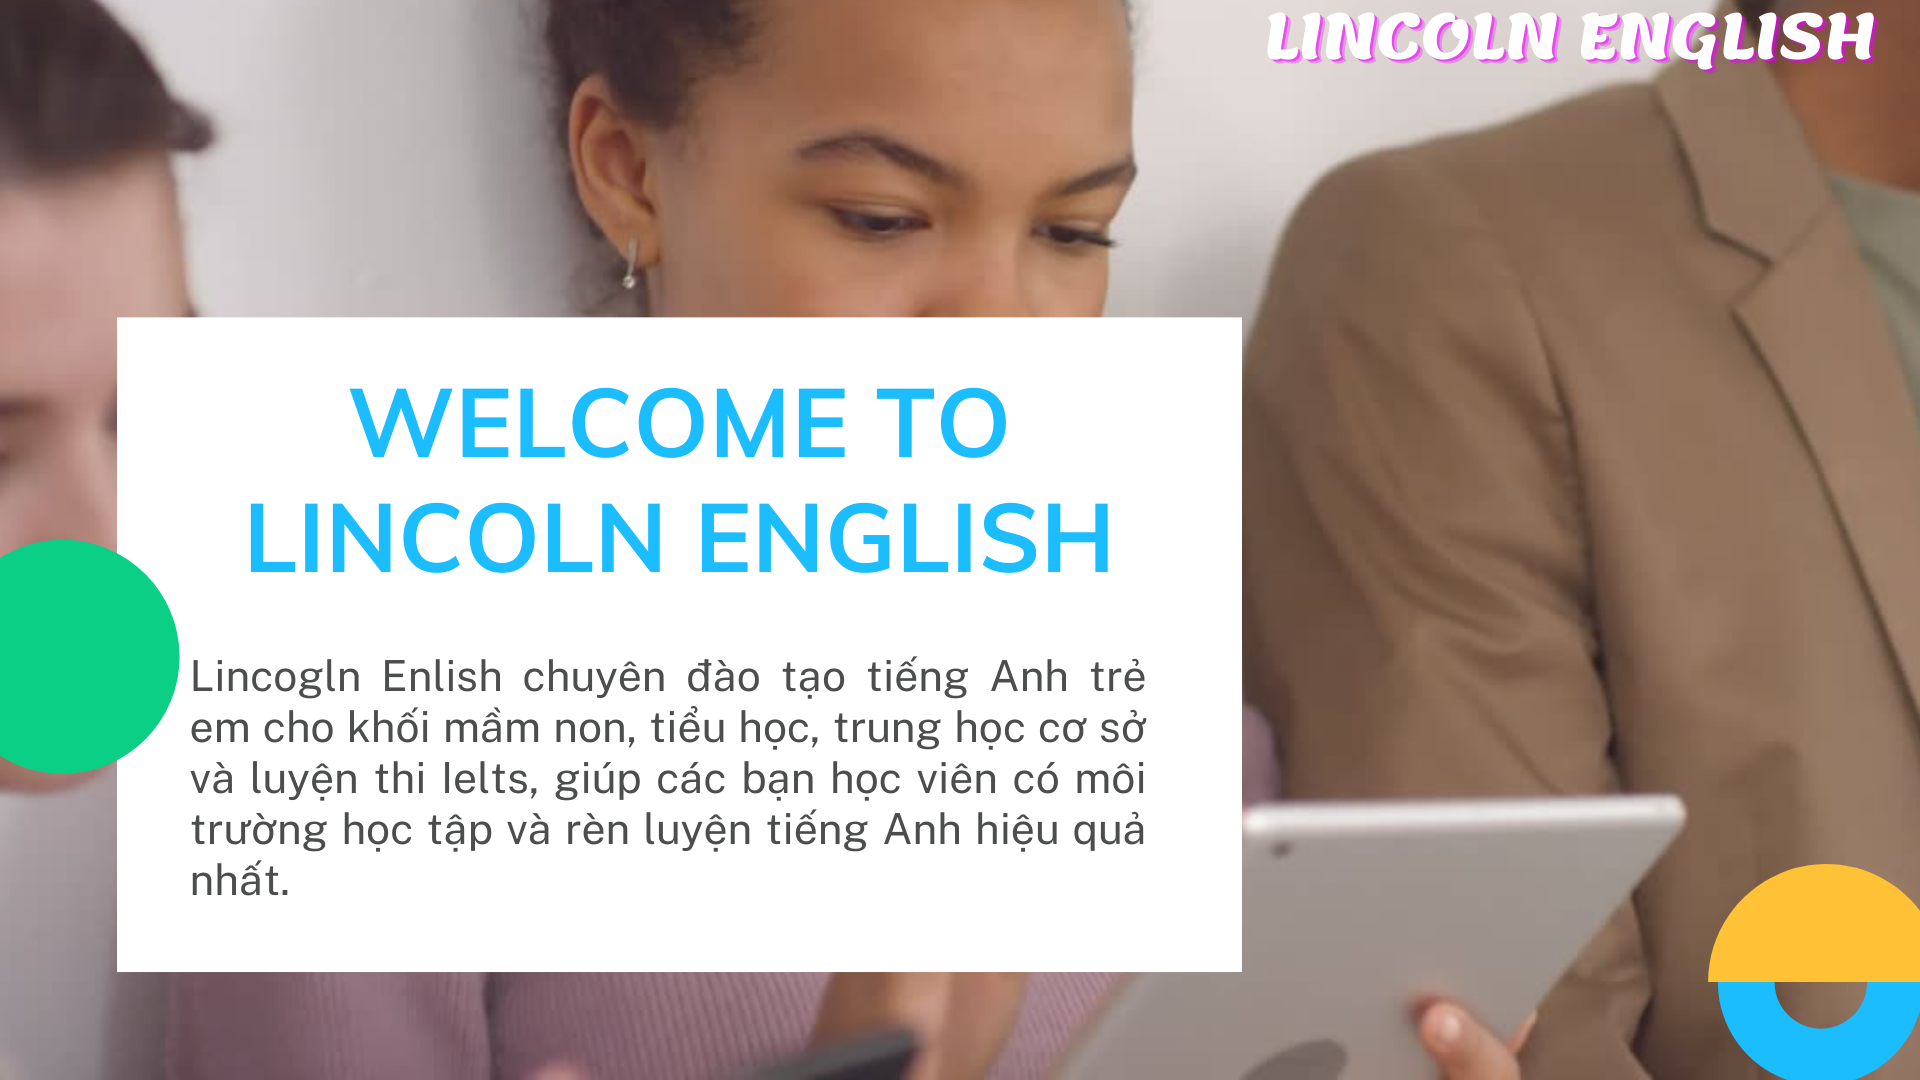 WELCOME TO LINCOLN ENGLISH